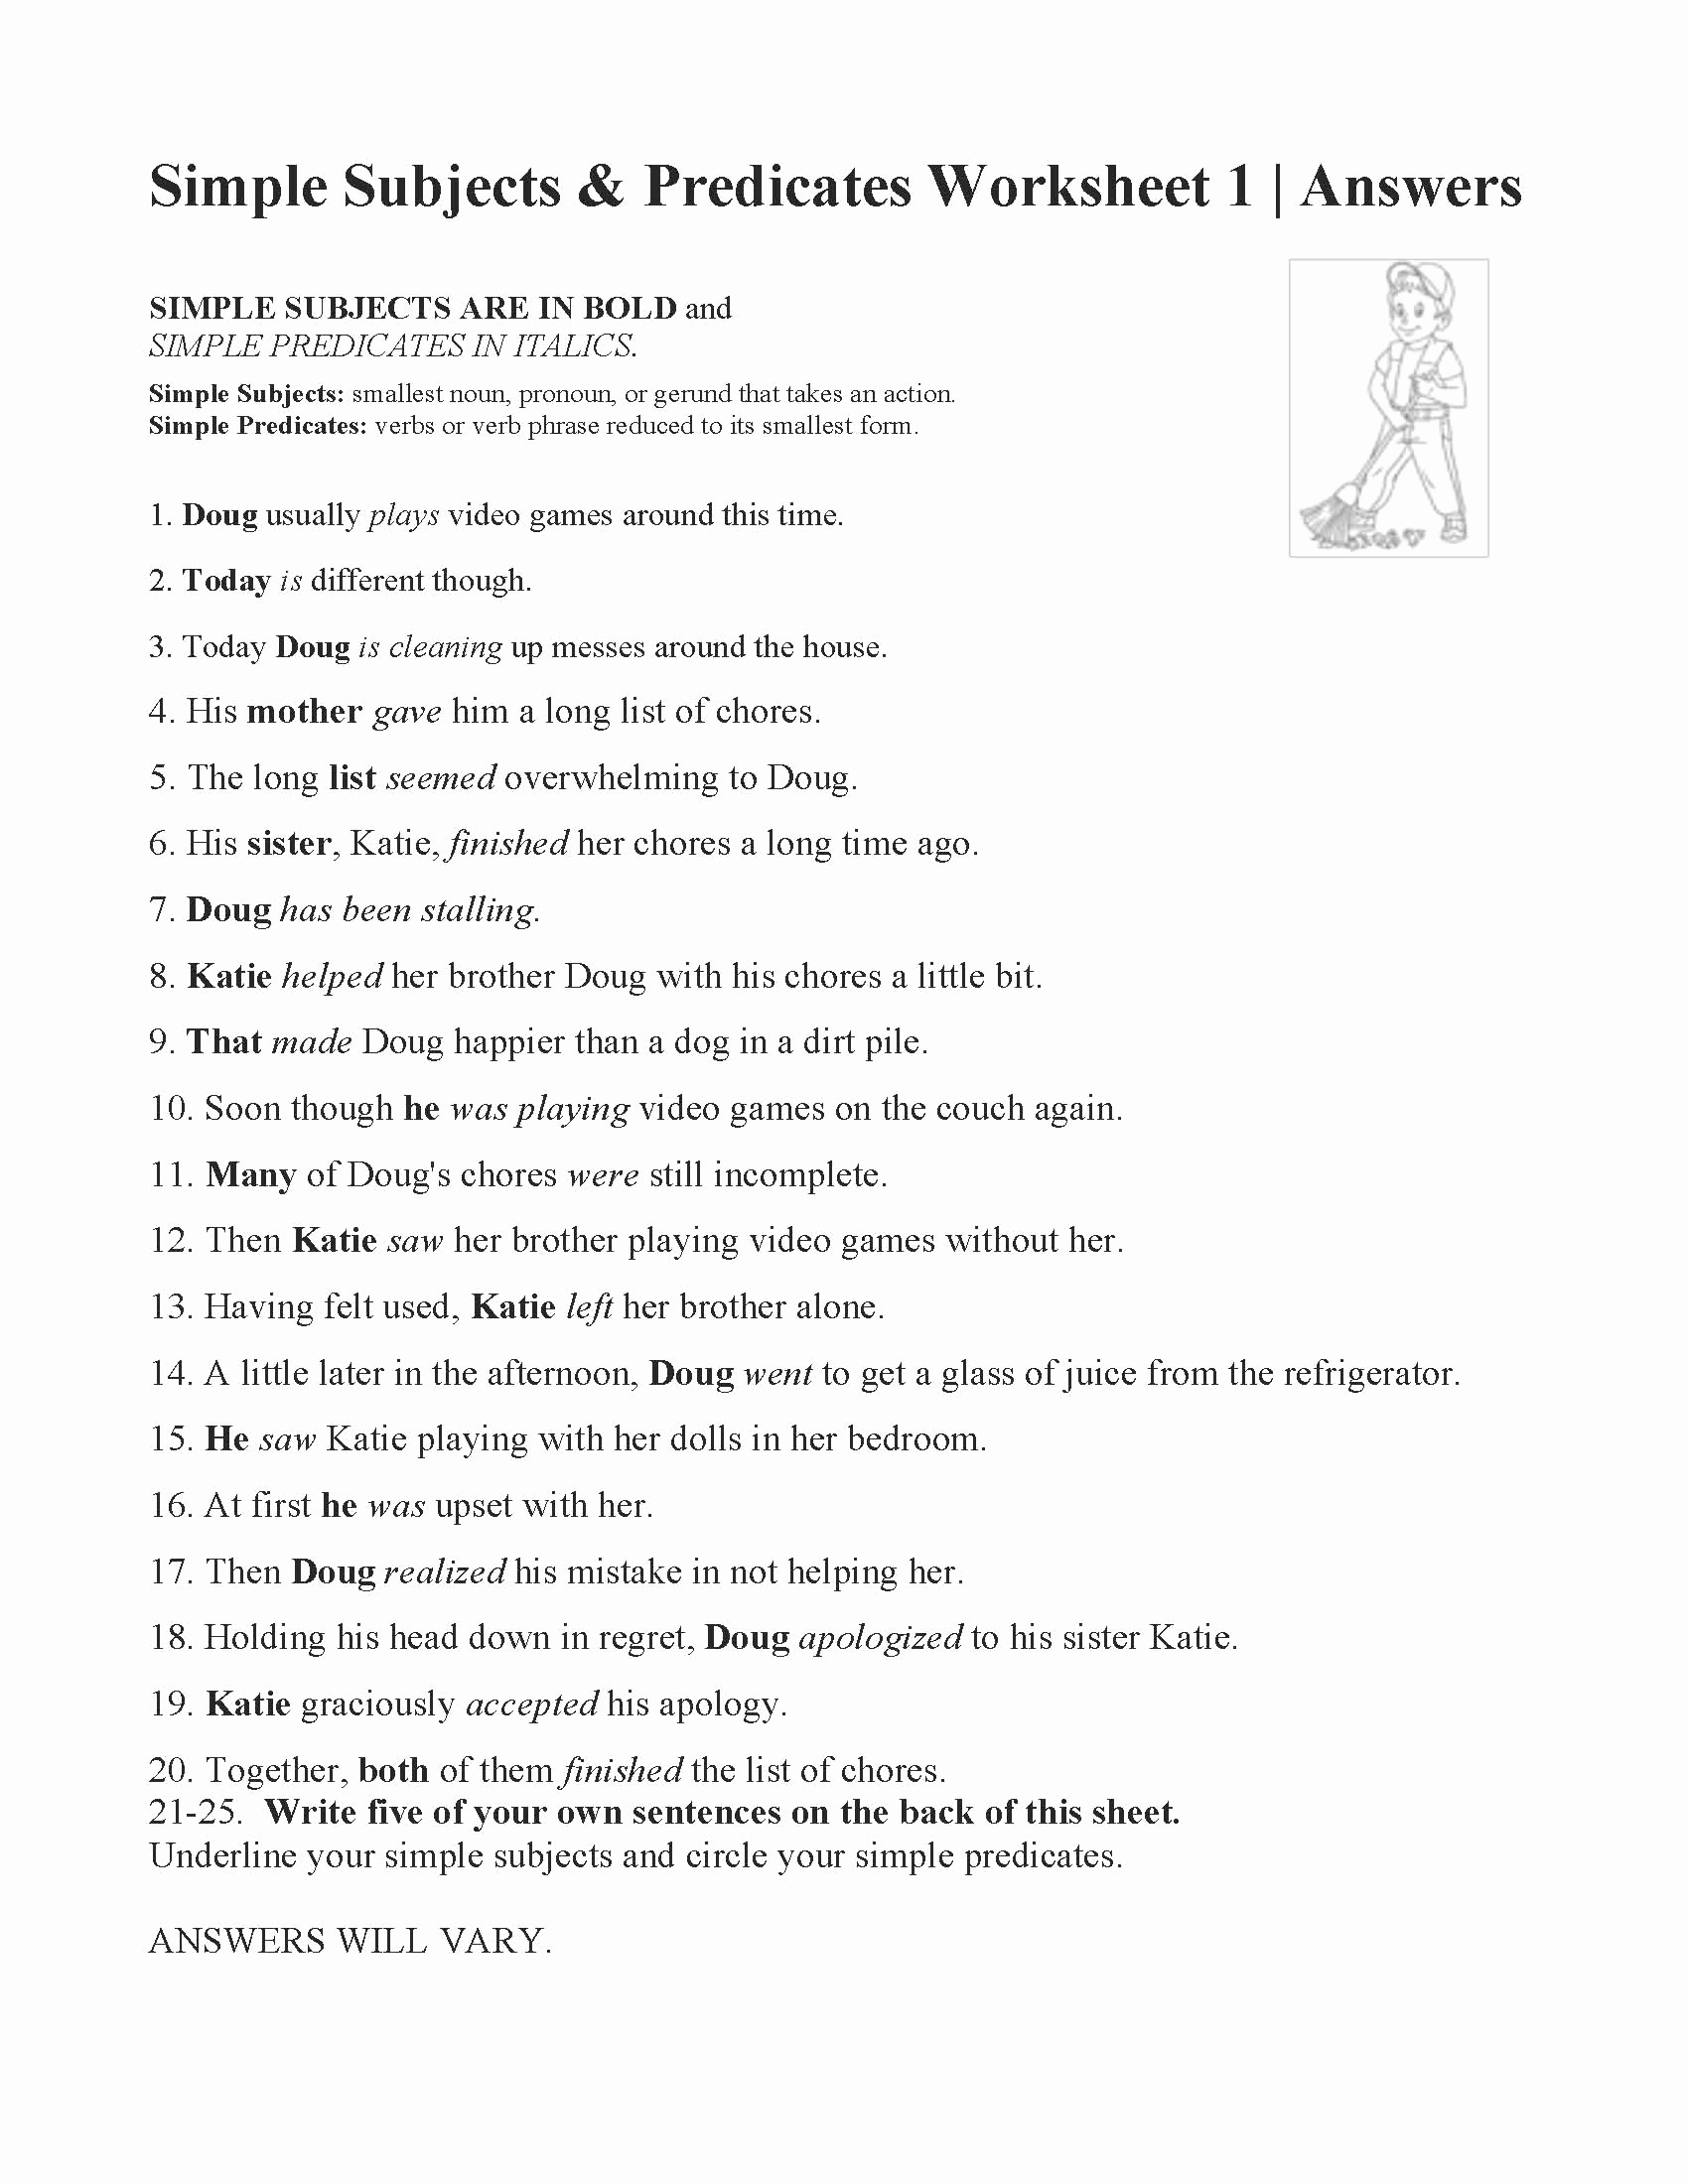 Free Subject and Predicate Worksheets Inspirational Simple Subjects and Predicates Worksheet 1